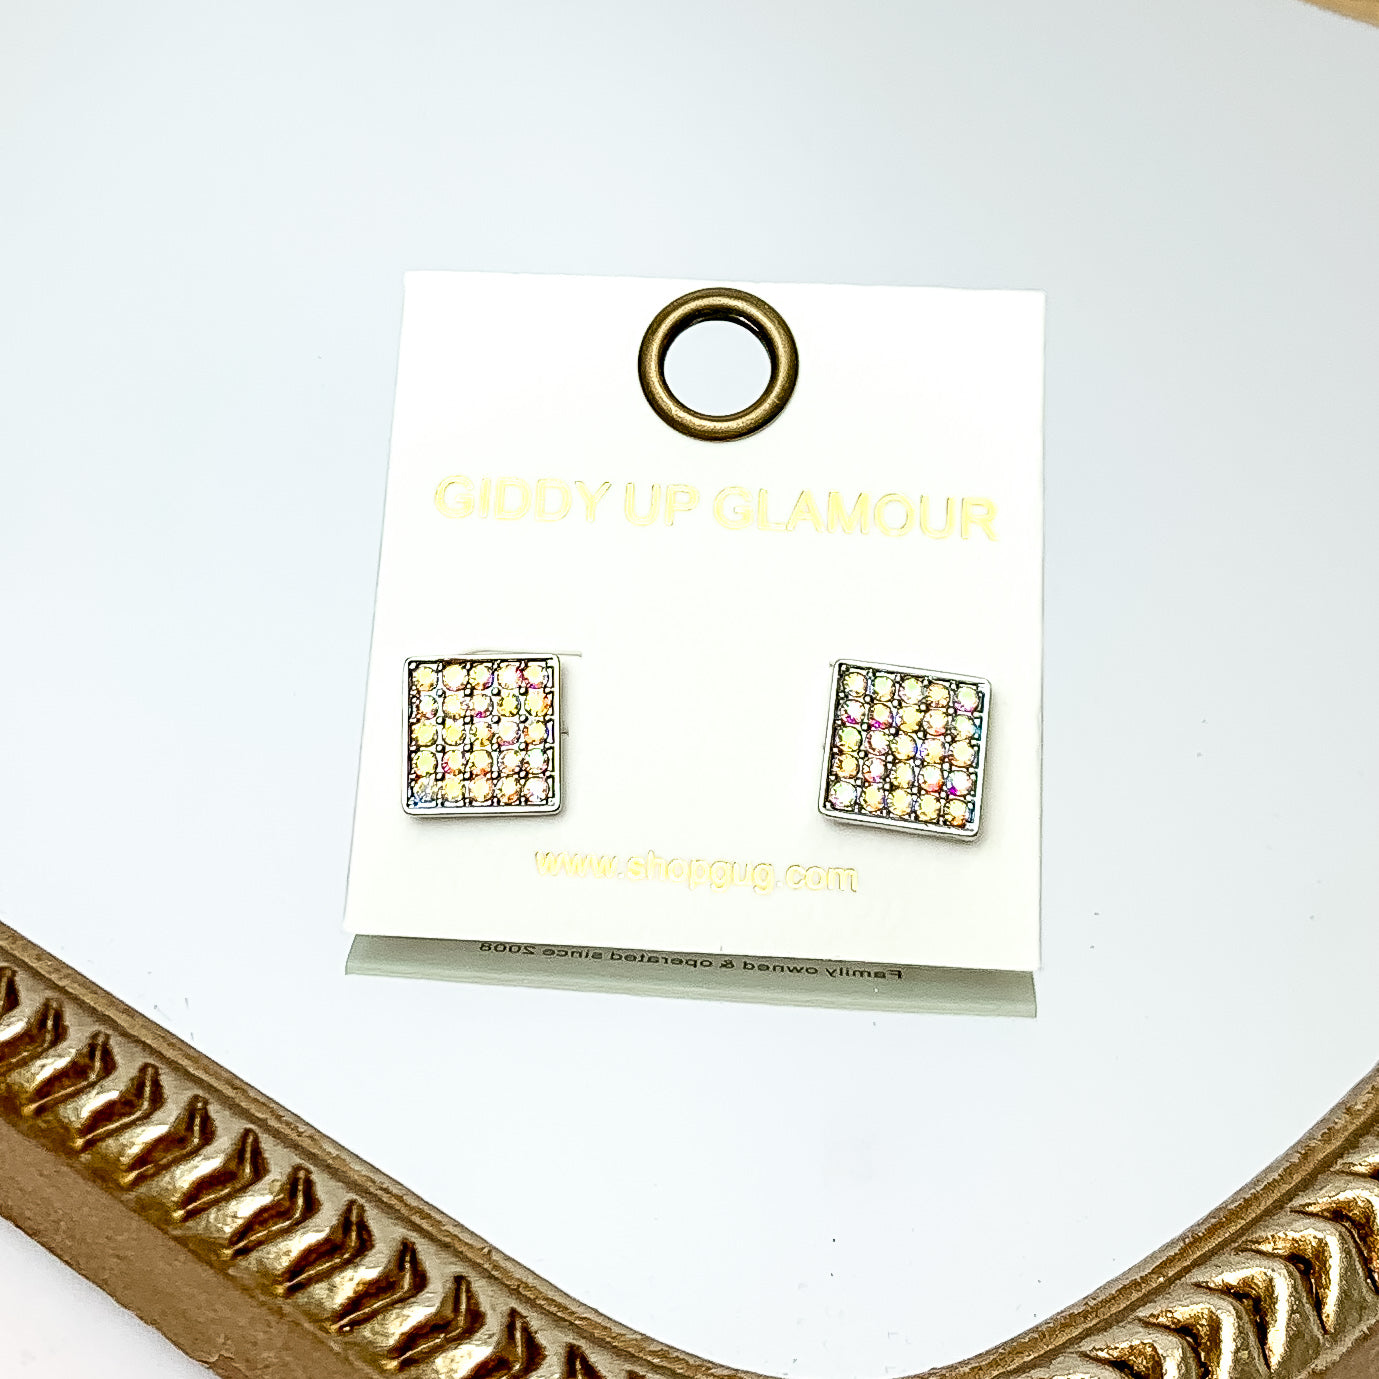 Square AB Crystal Stud Earrings in Silver Tone. These earrings are pictured on a white background with a gold frame around.